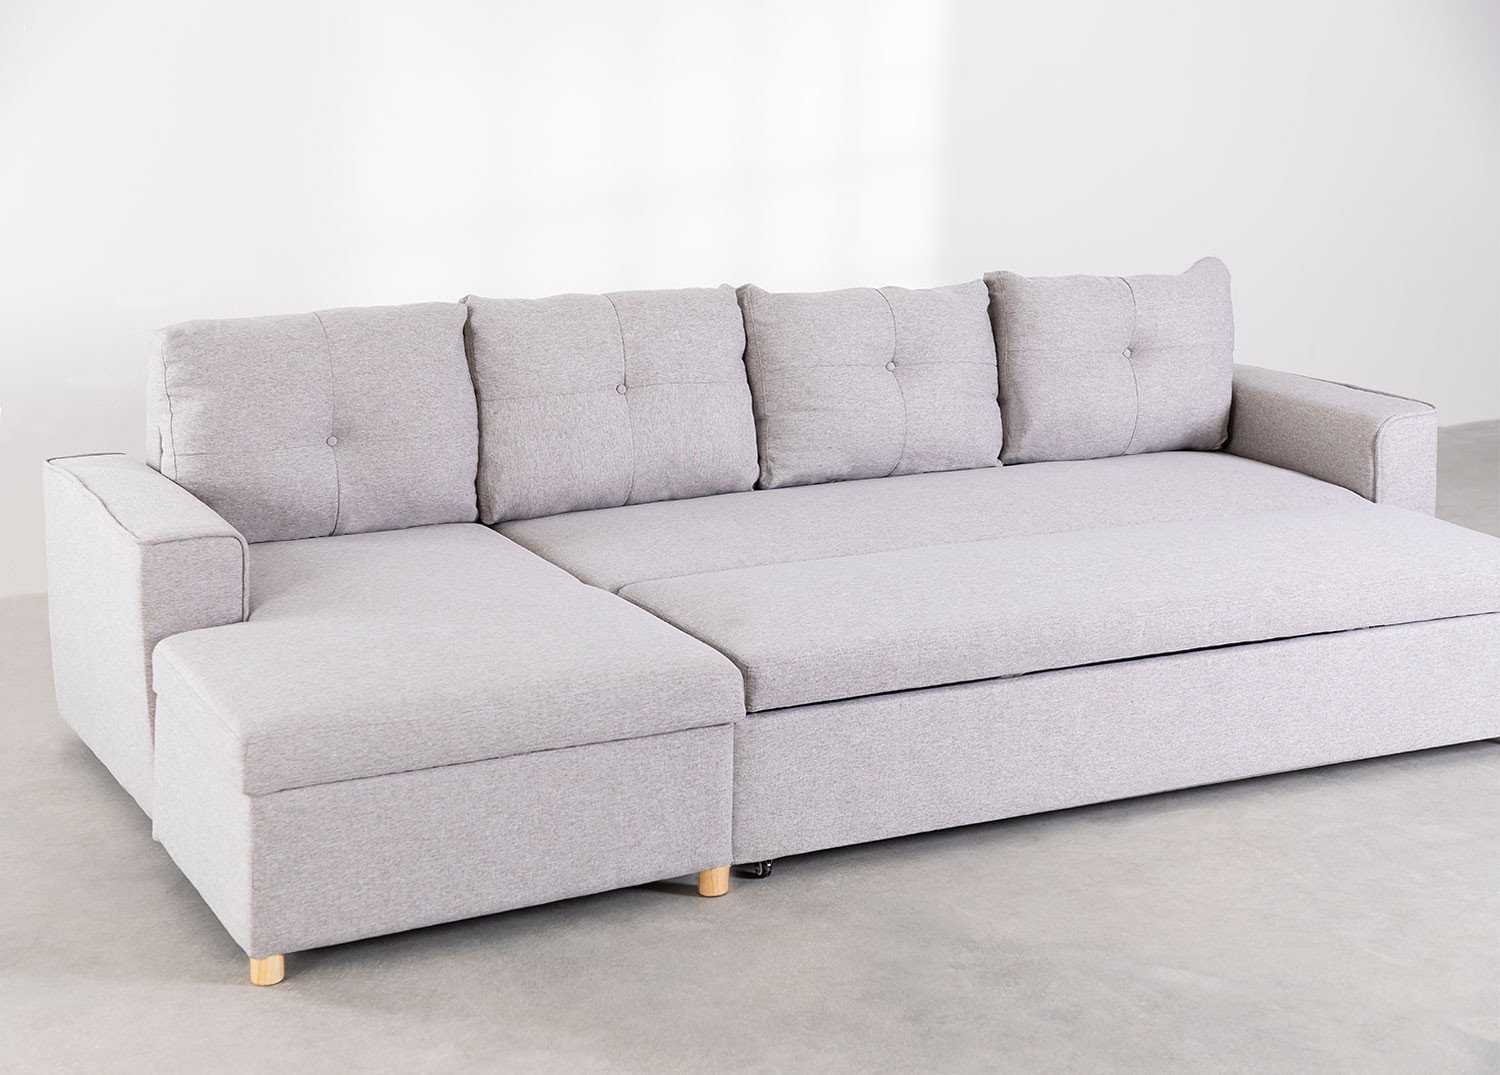 buy chaise longue sofa bed